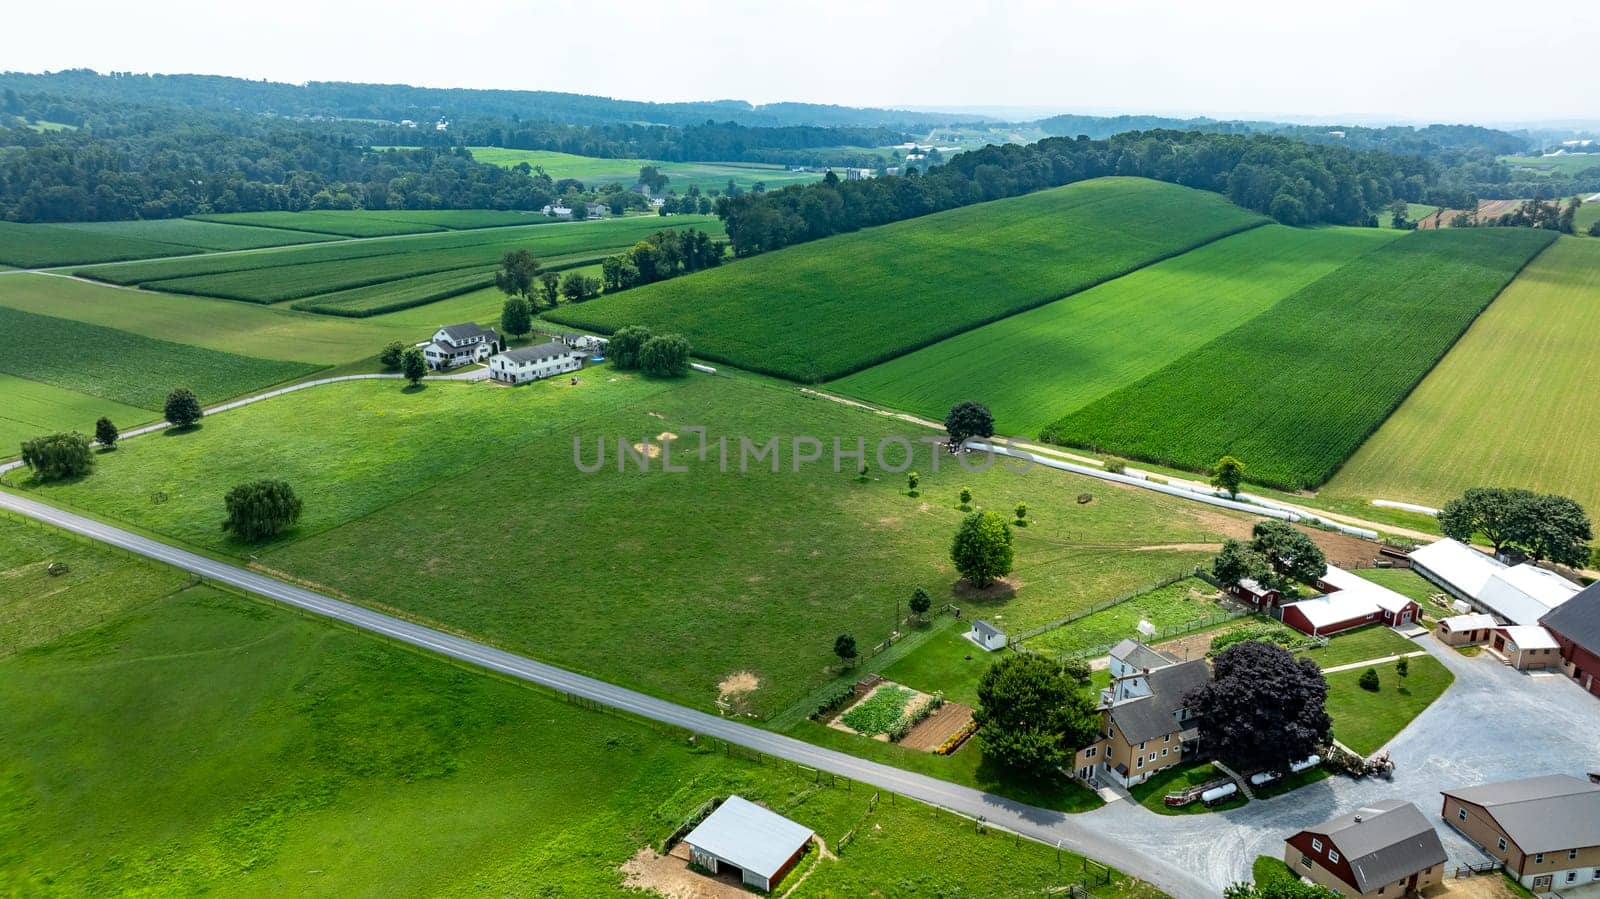 An Aerial View of Farmlands and Rural Homesteads